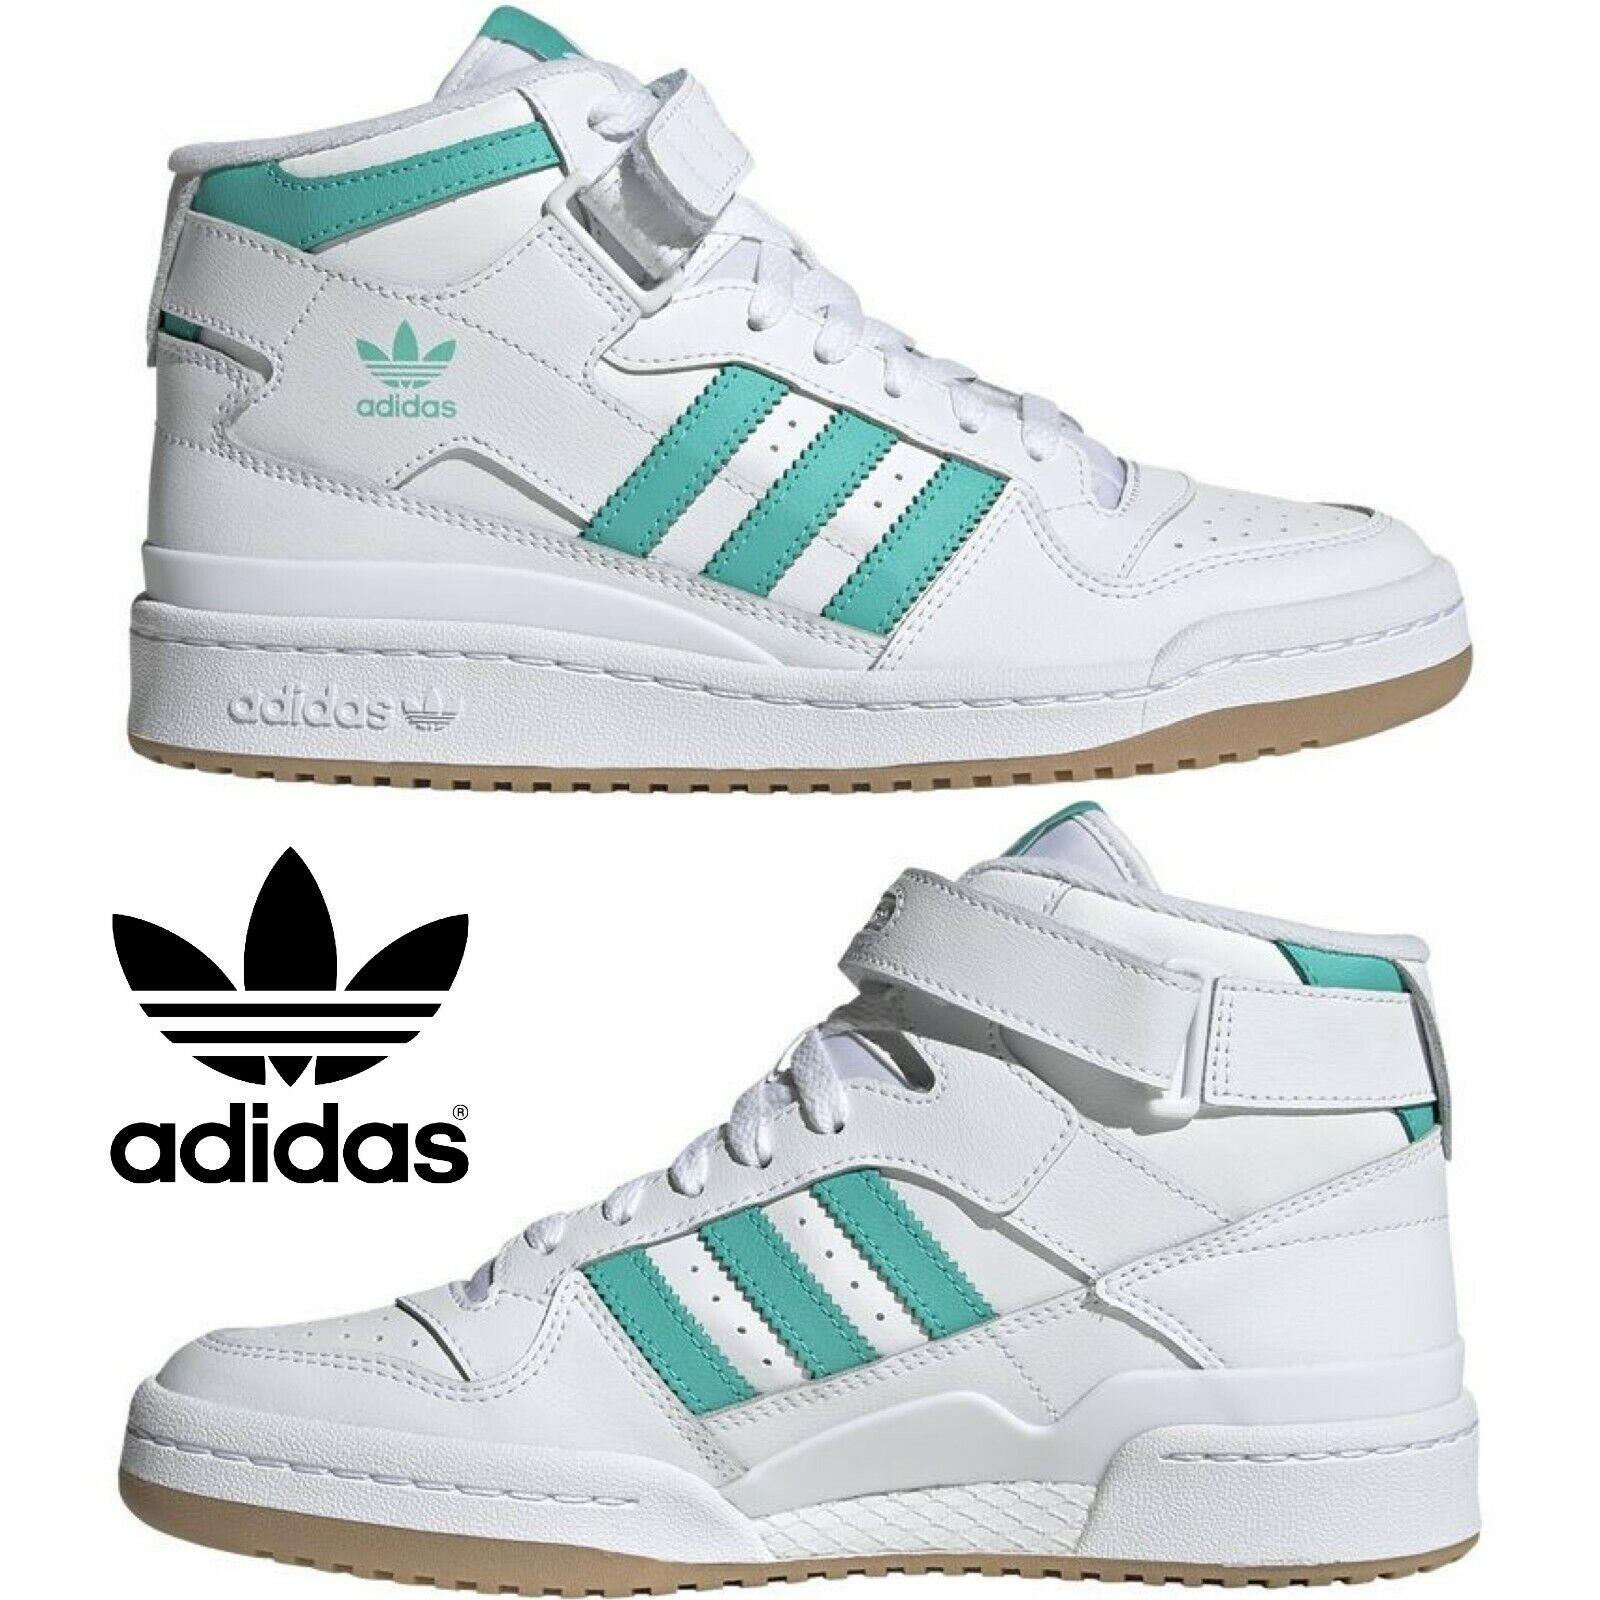 Adidas Originals Forum Mid Women`s Sneakers Comfort Casual Shoes White Mint - White , White/Mint Manufacturer